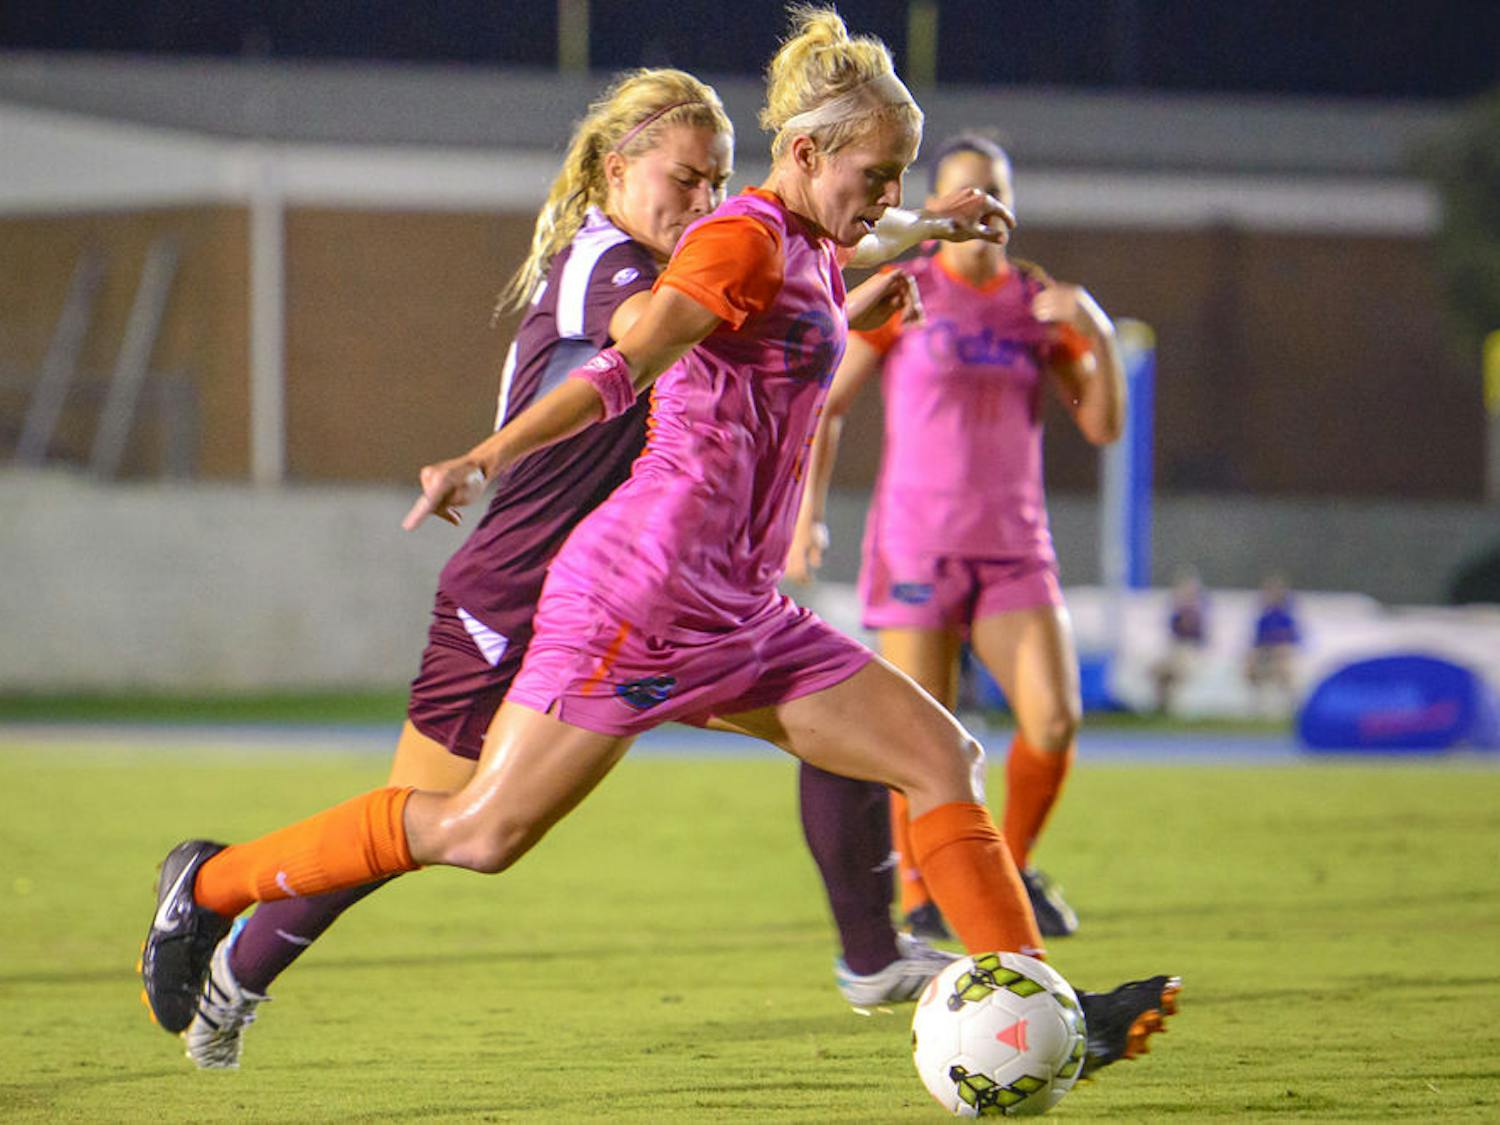 Tessa Andujar dribbles the ball during Florida's 5-1 win against Mississippi State on Friday at James G. Pressly Stadium.